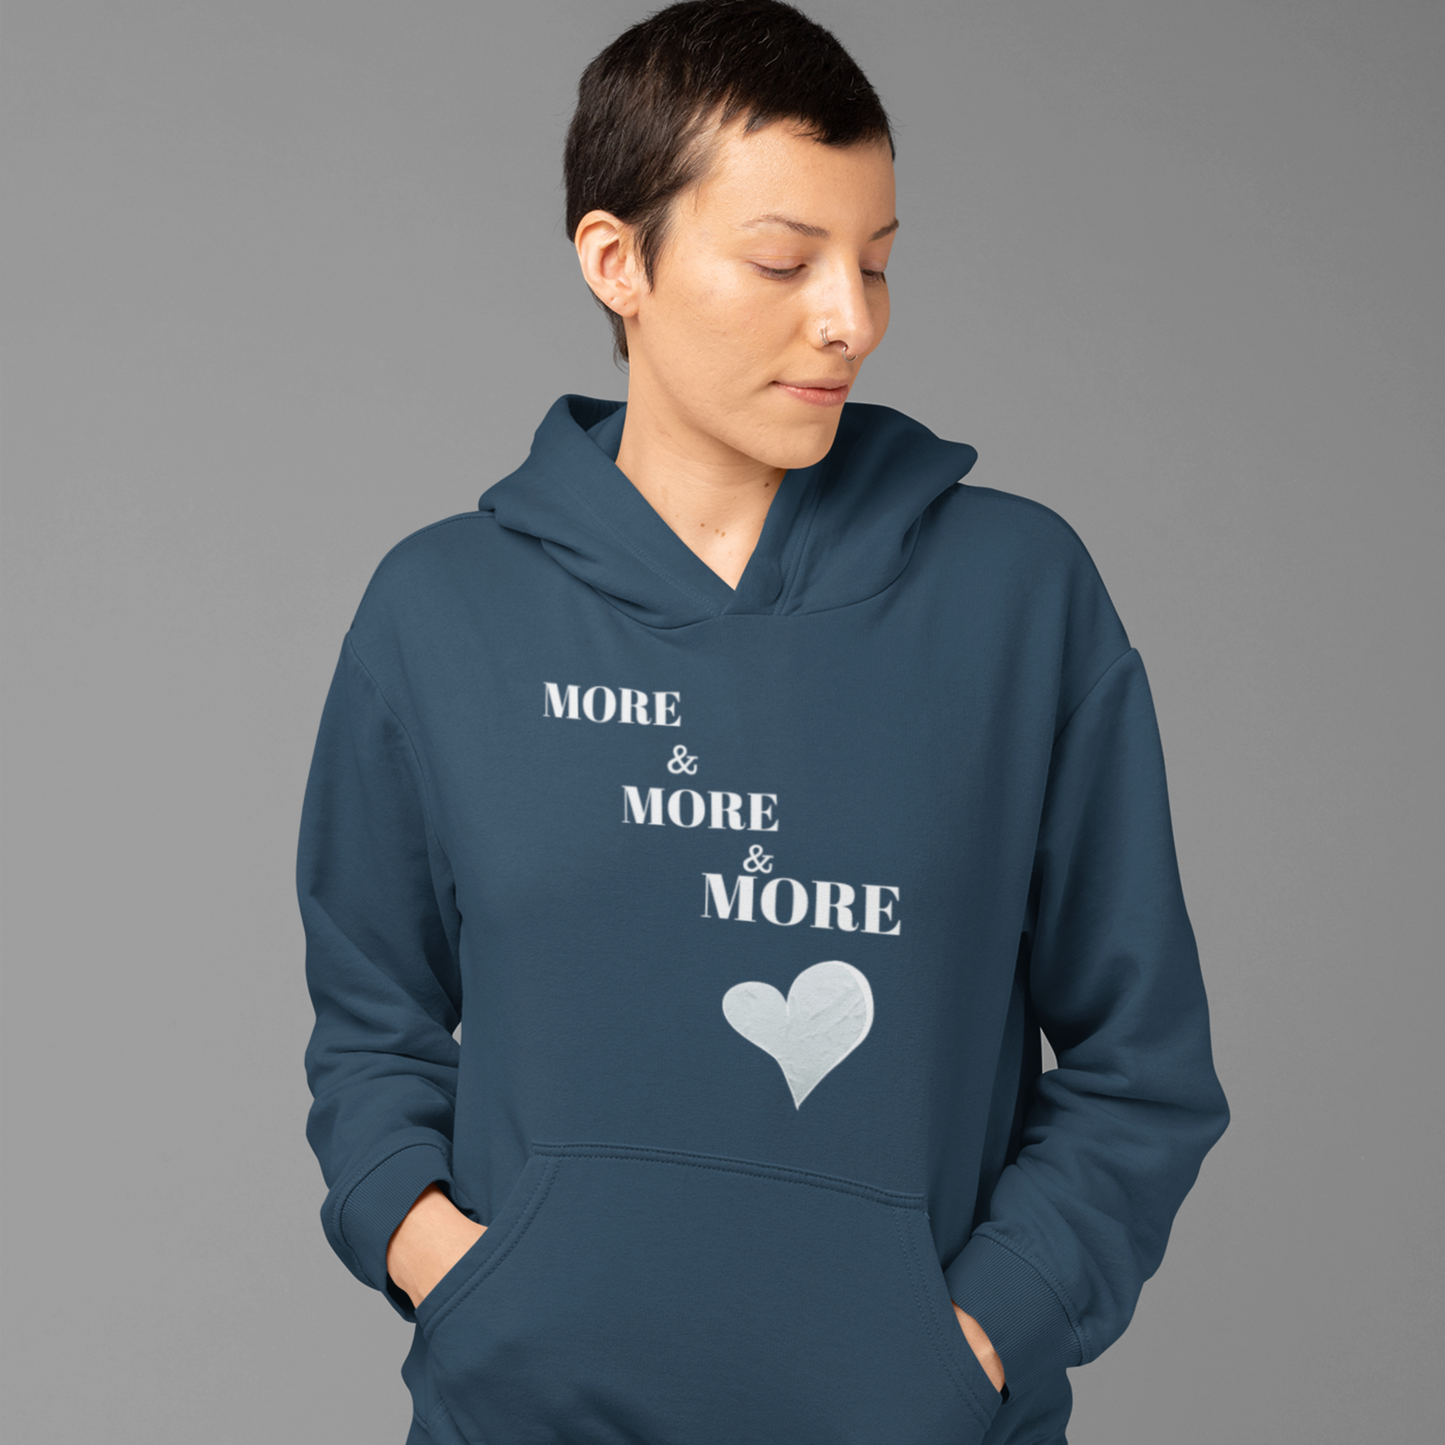 More and more and more love hooded sweatshirt gift, hoodie gift of love for friends, sweatshirt gift that celebrates love